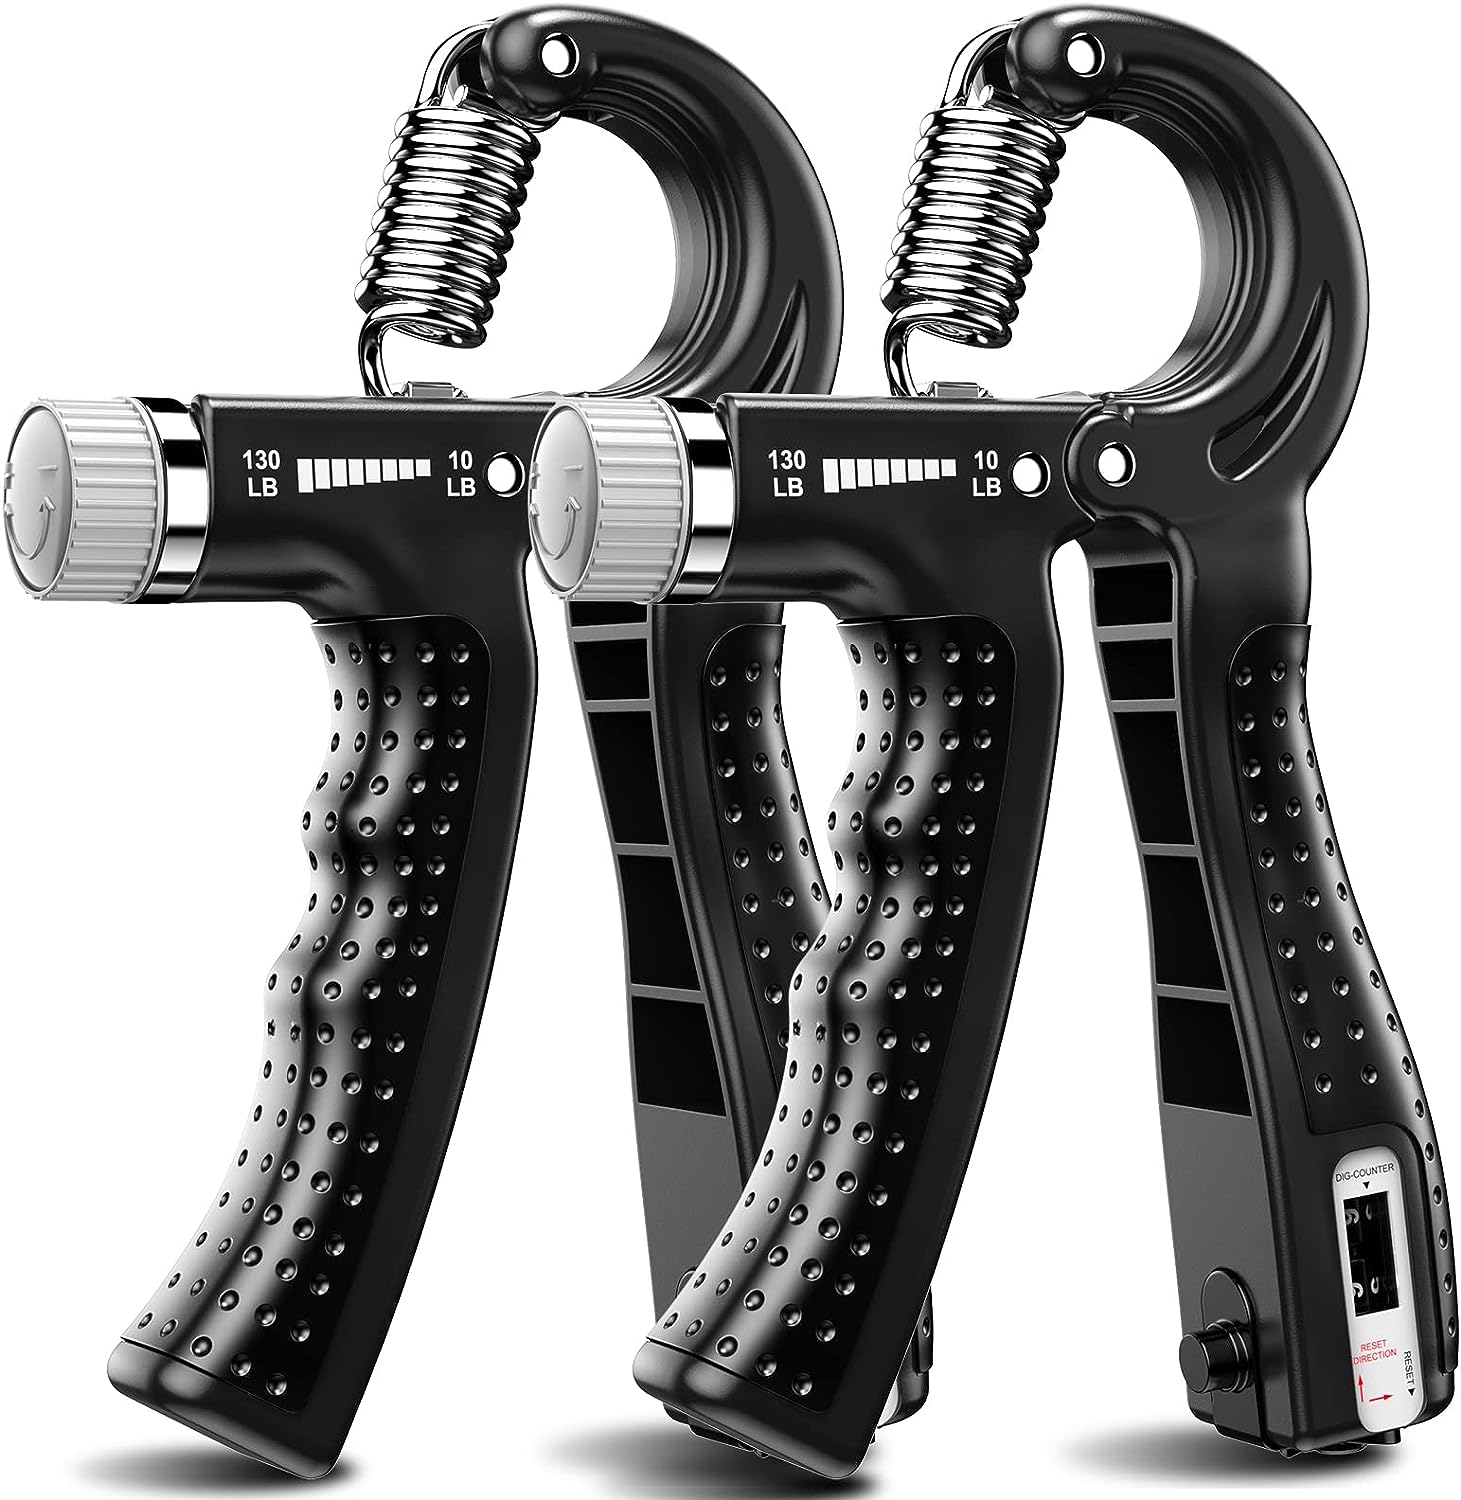 You are currently viewing KDG Hand Grip Strengthener Review